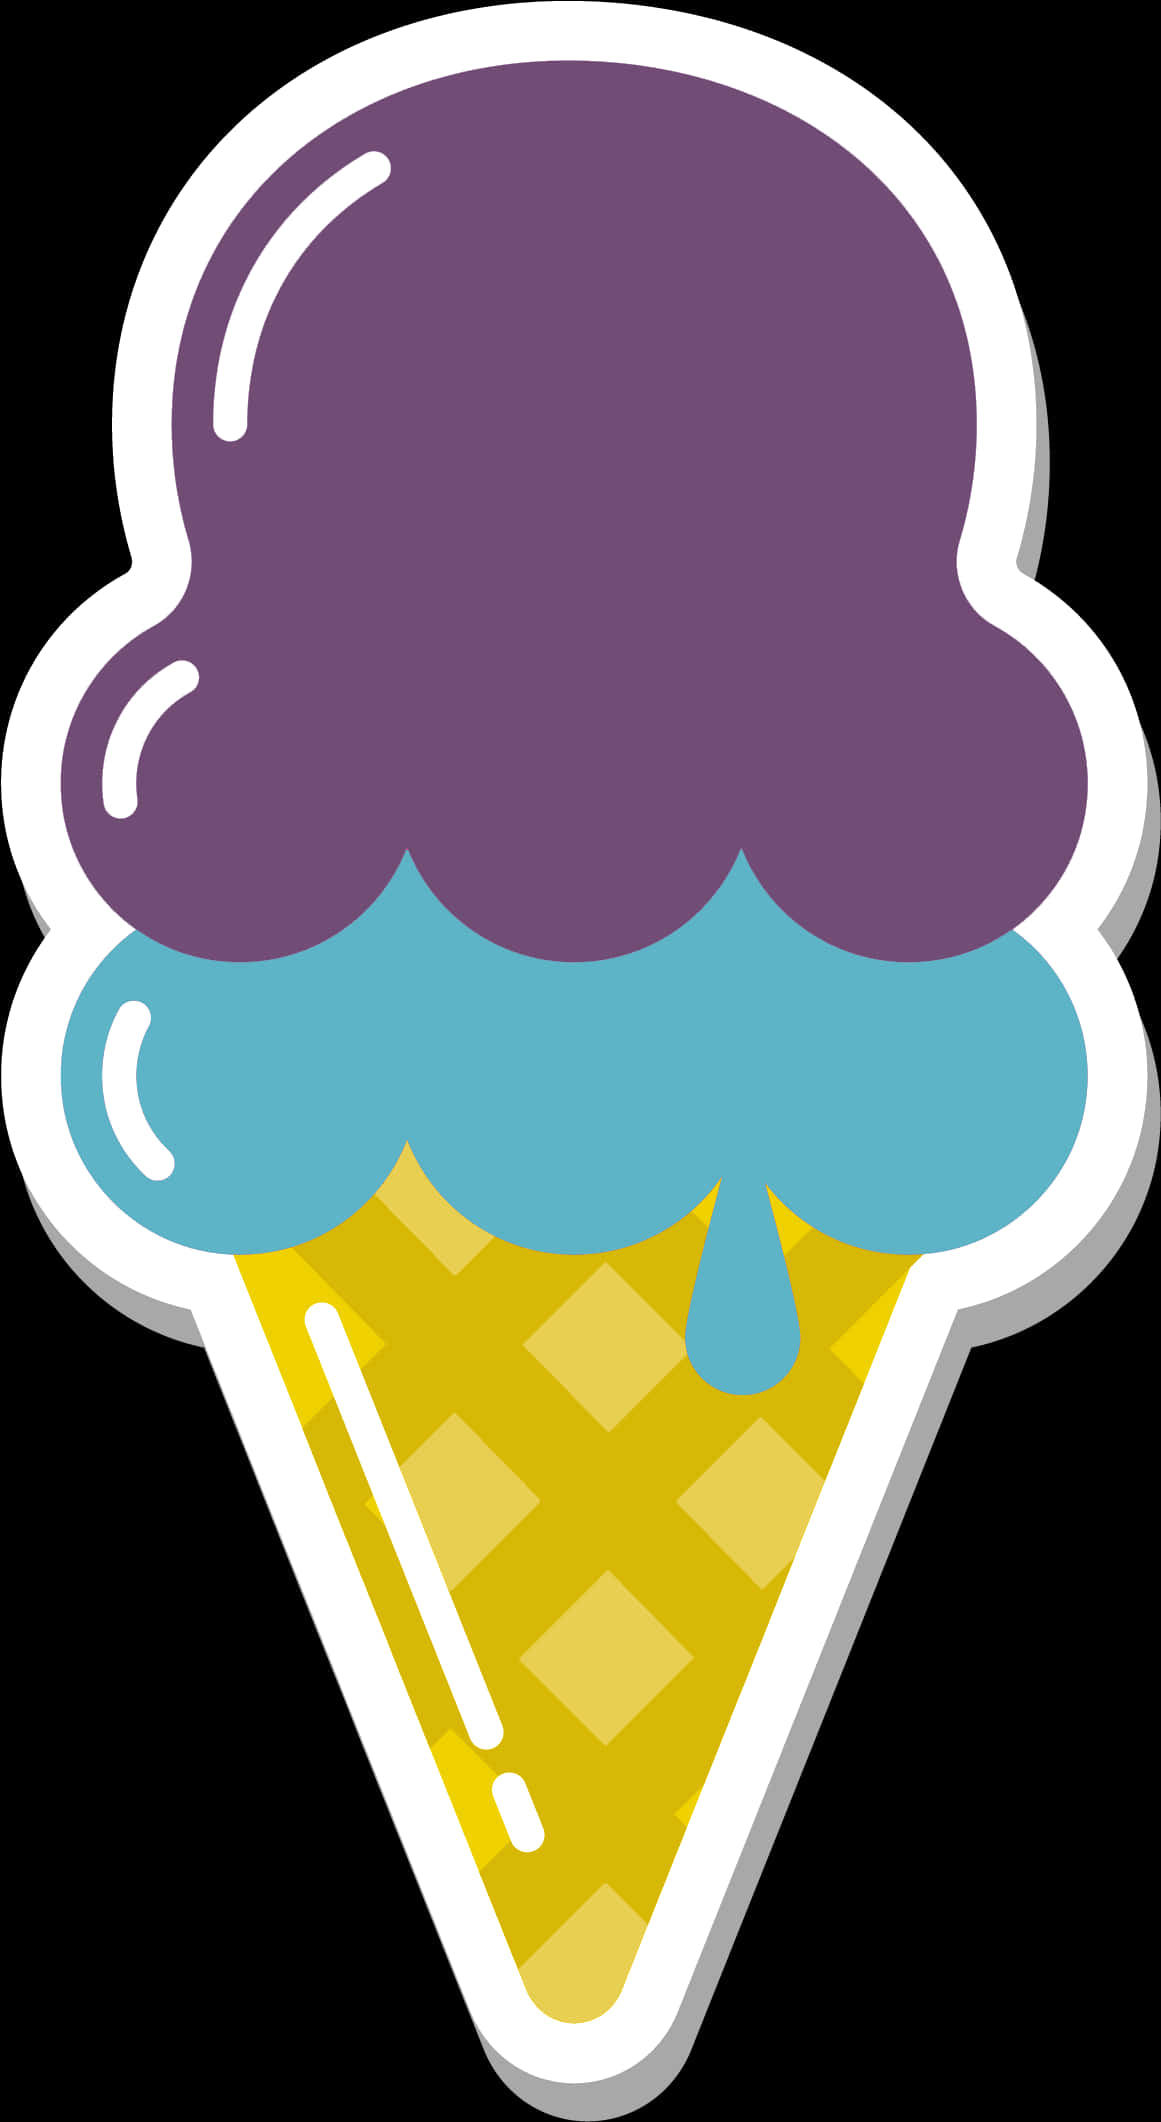 Colorful Ice Cream Cone Clipart PNG image